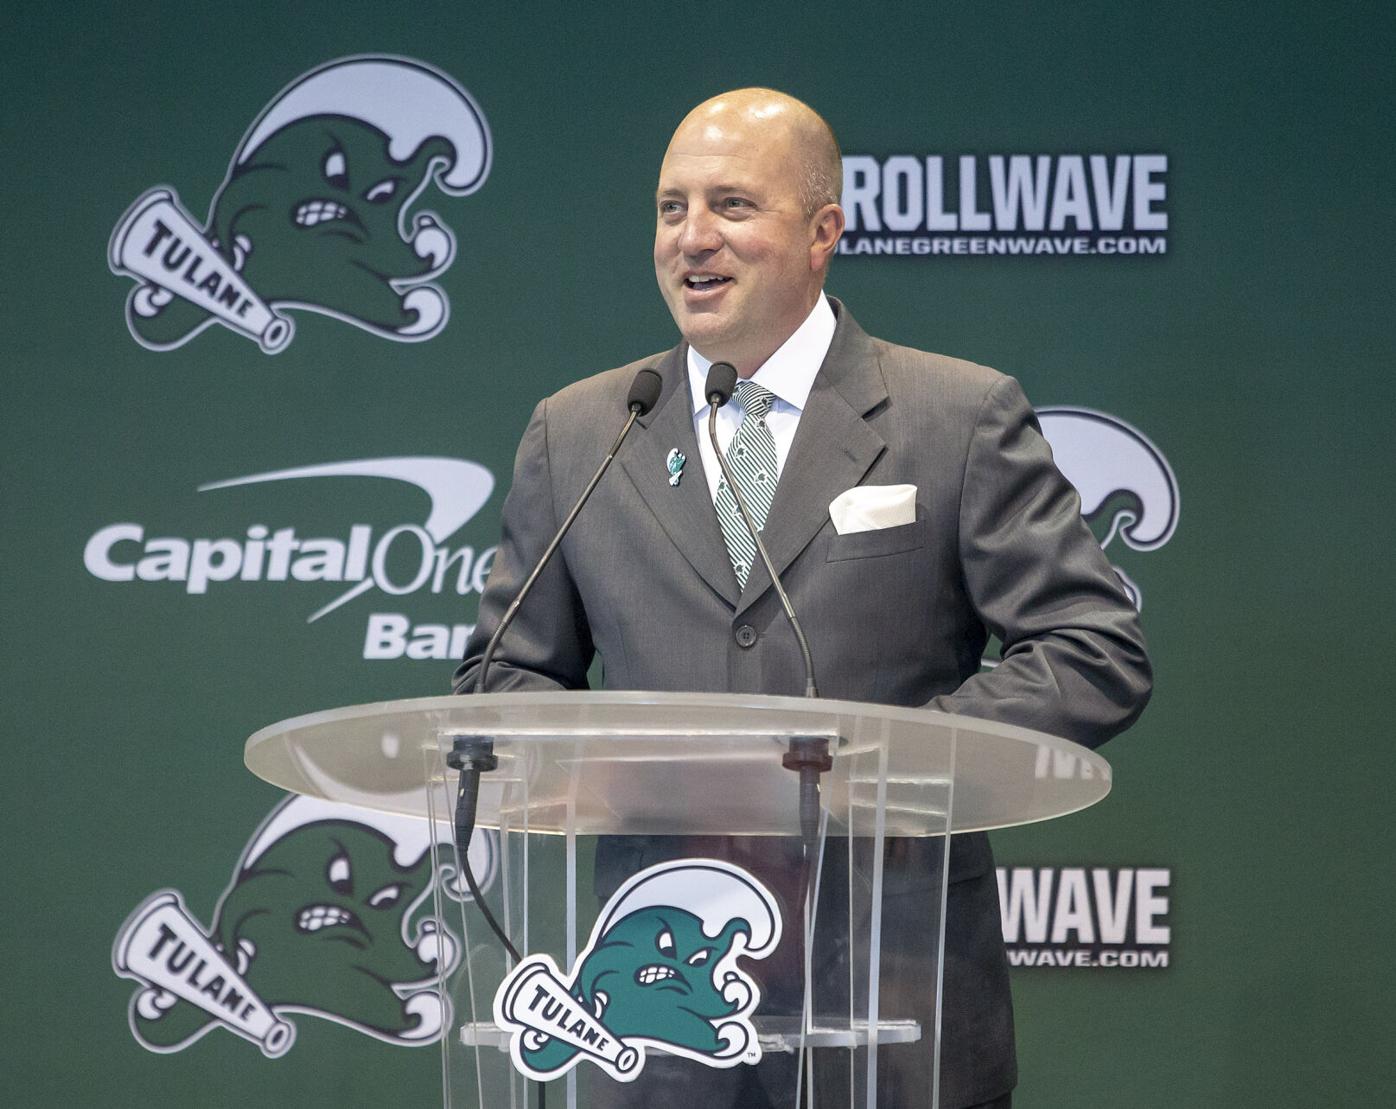 Tulane Alumni - Momentum is high for Tulane Athletics with a new athletic  director and new football head coach